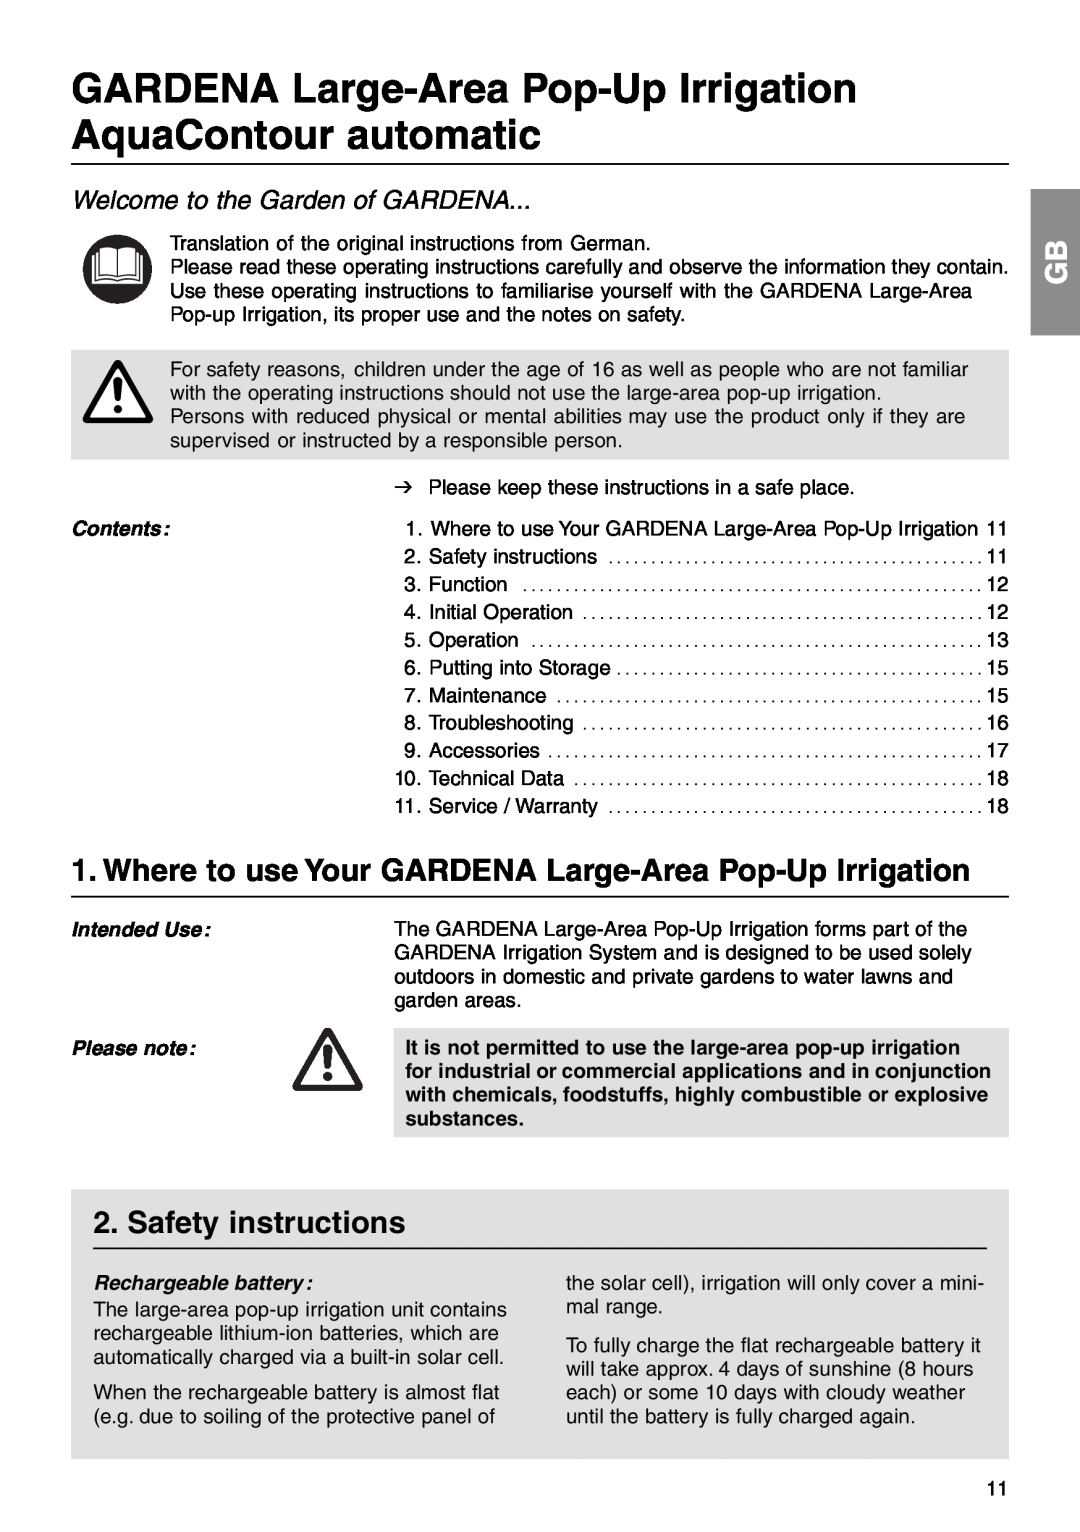 Gardena Art. 1559 manual Where to use Your GARDENA Large-Area Pop-Up Irrigation, Safety instructions 